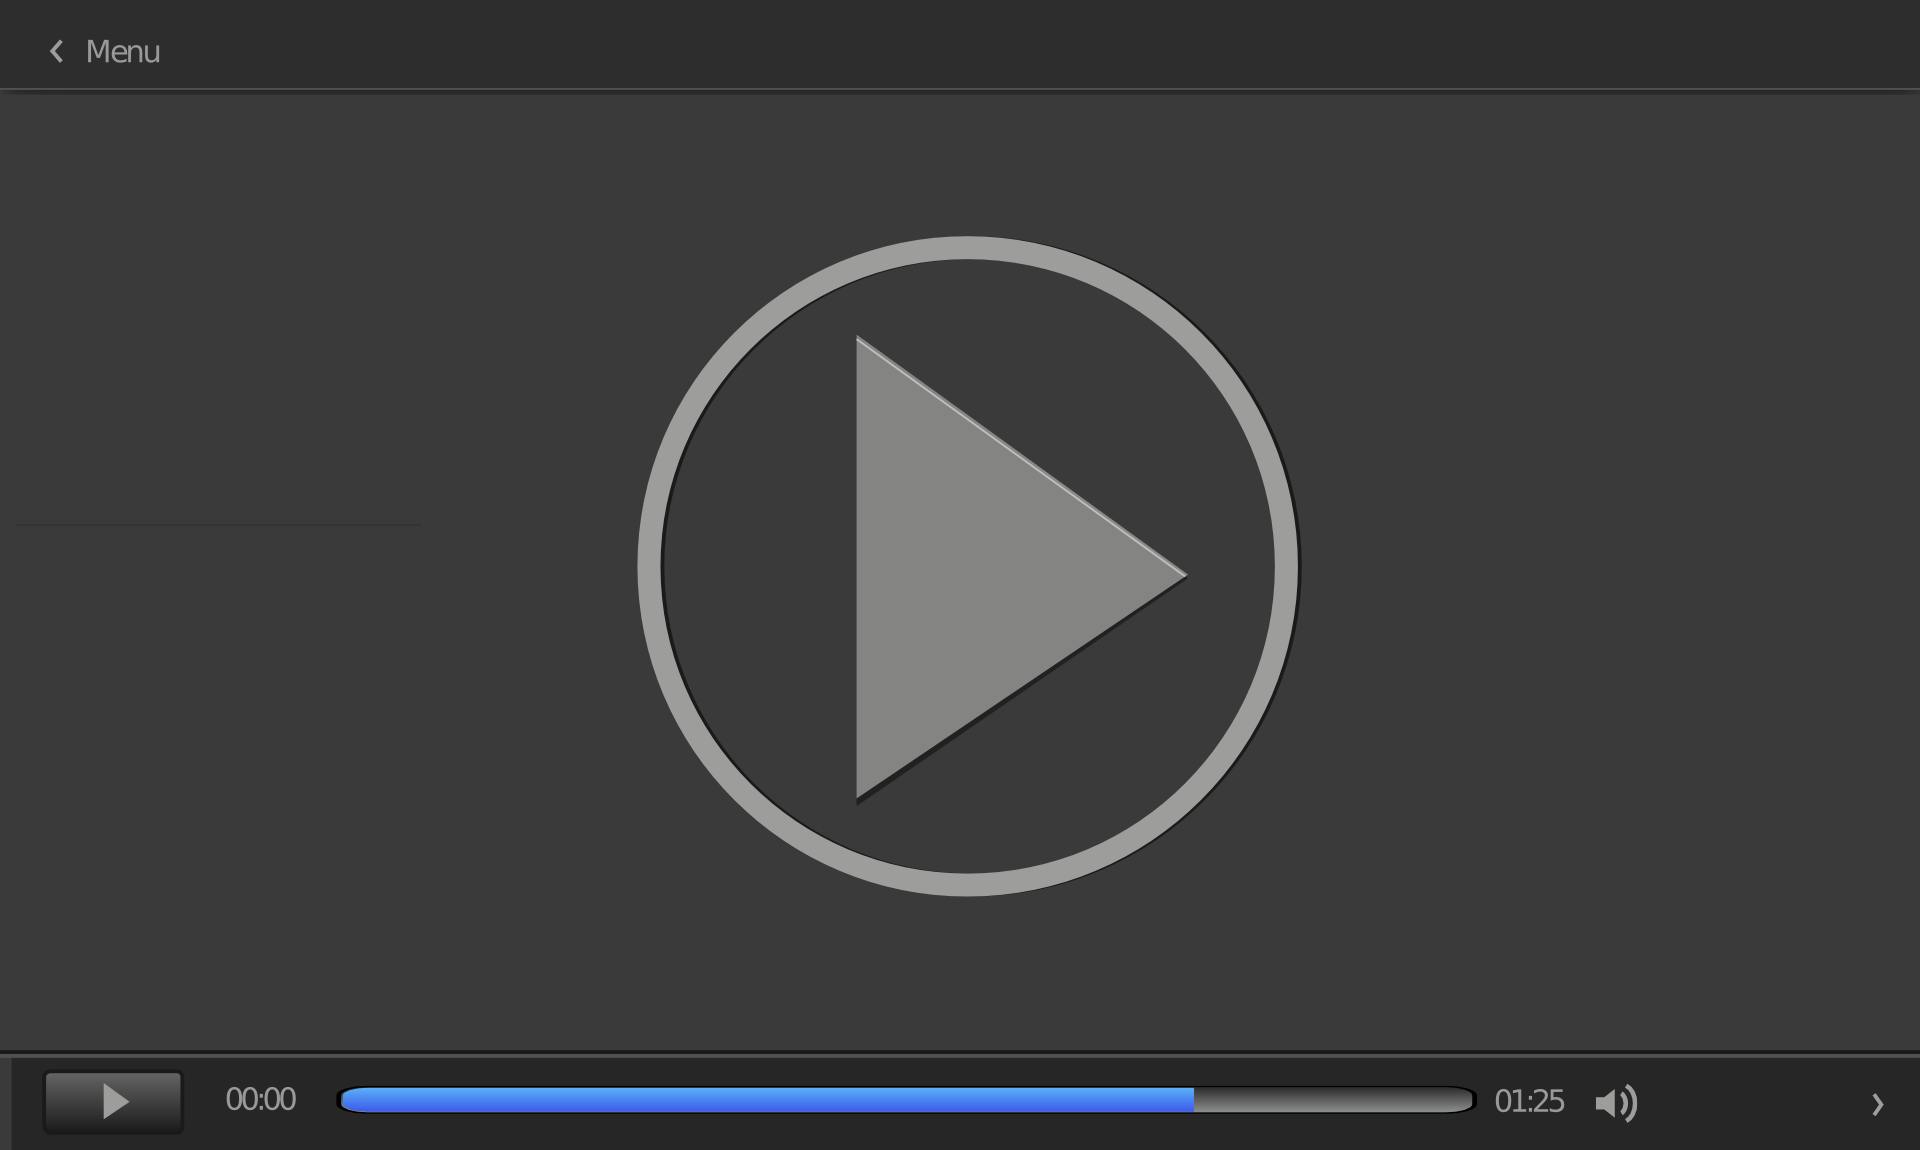 Video player example